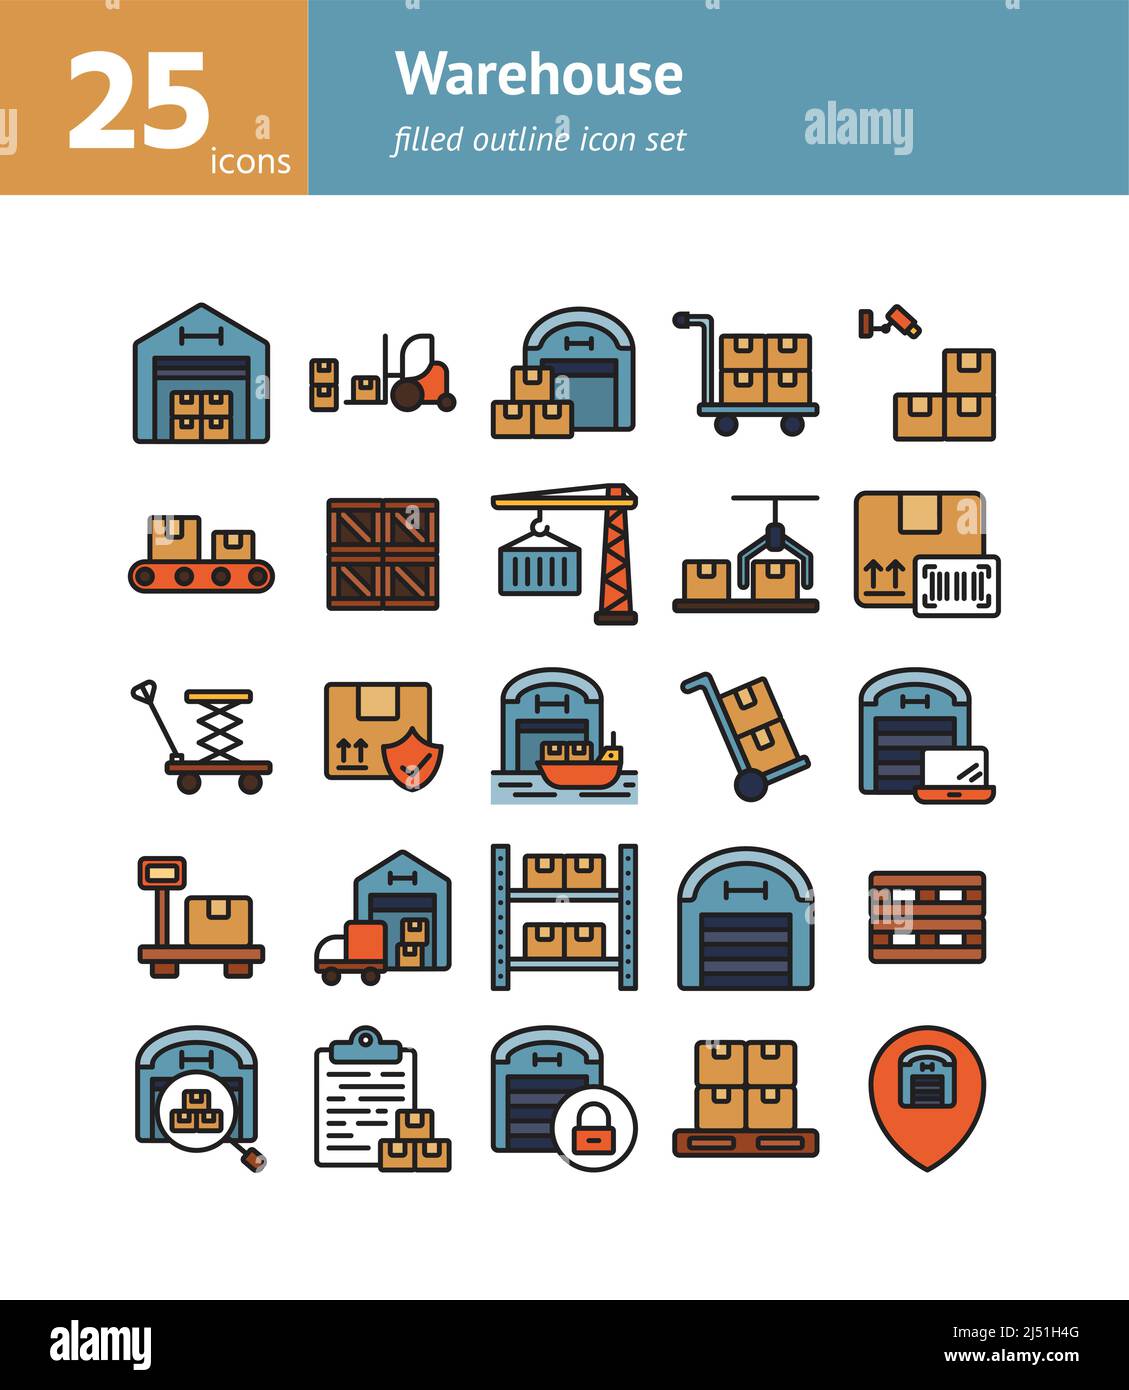 Warehouse filled outline icon set. Vector and Illustration. Stock Vector